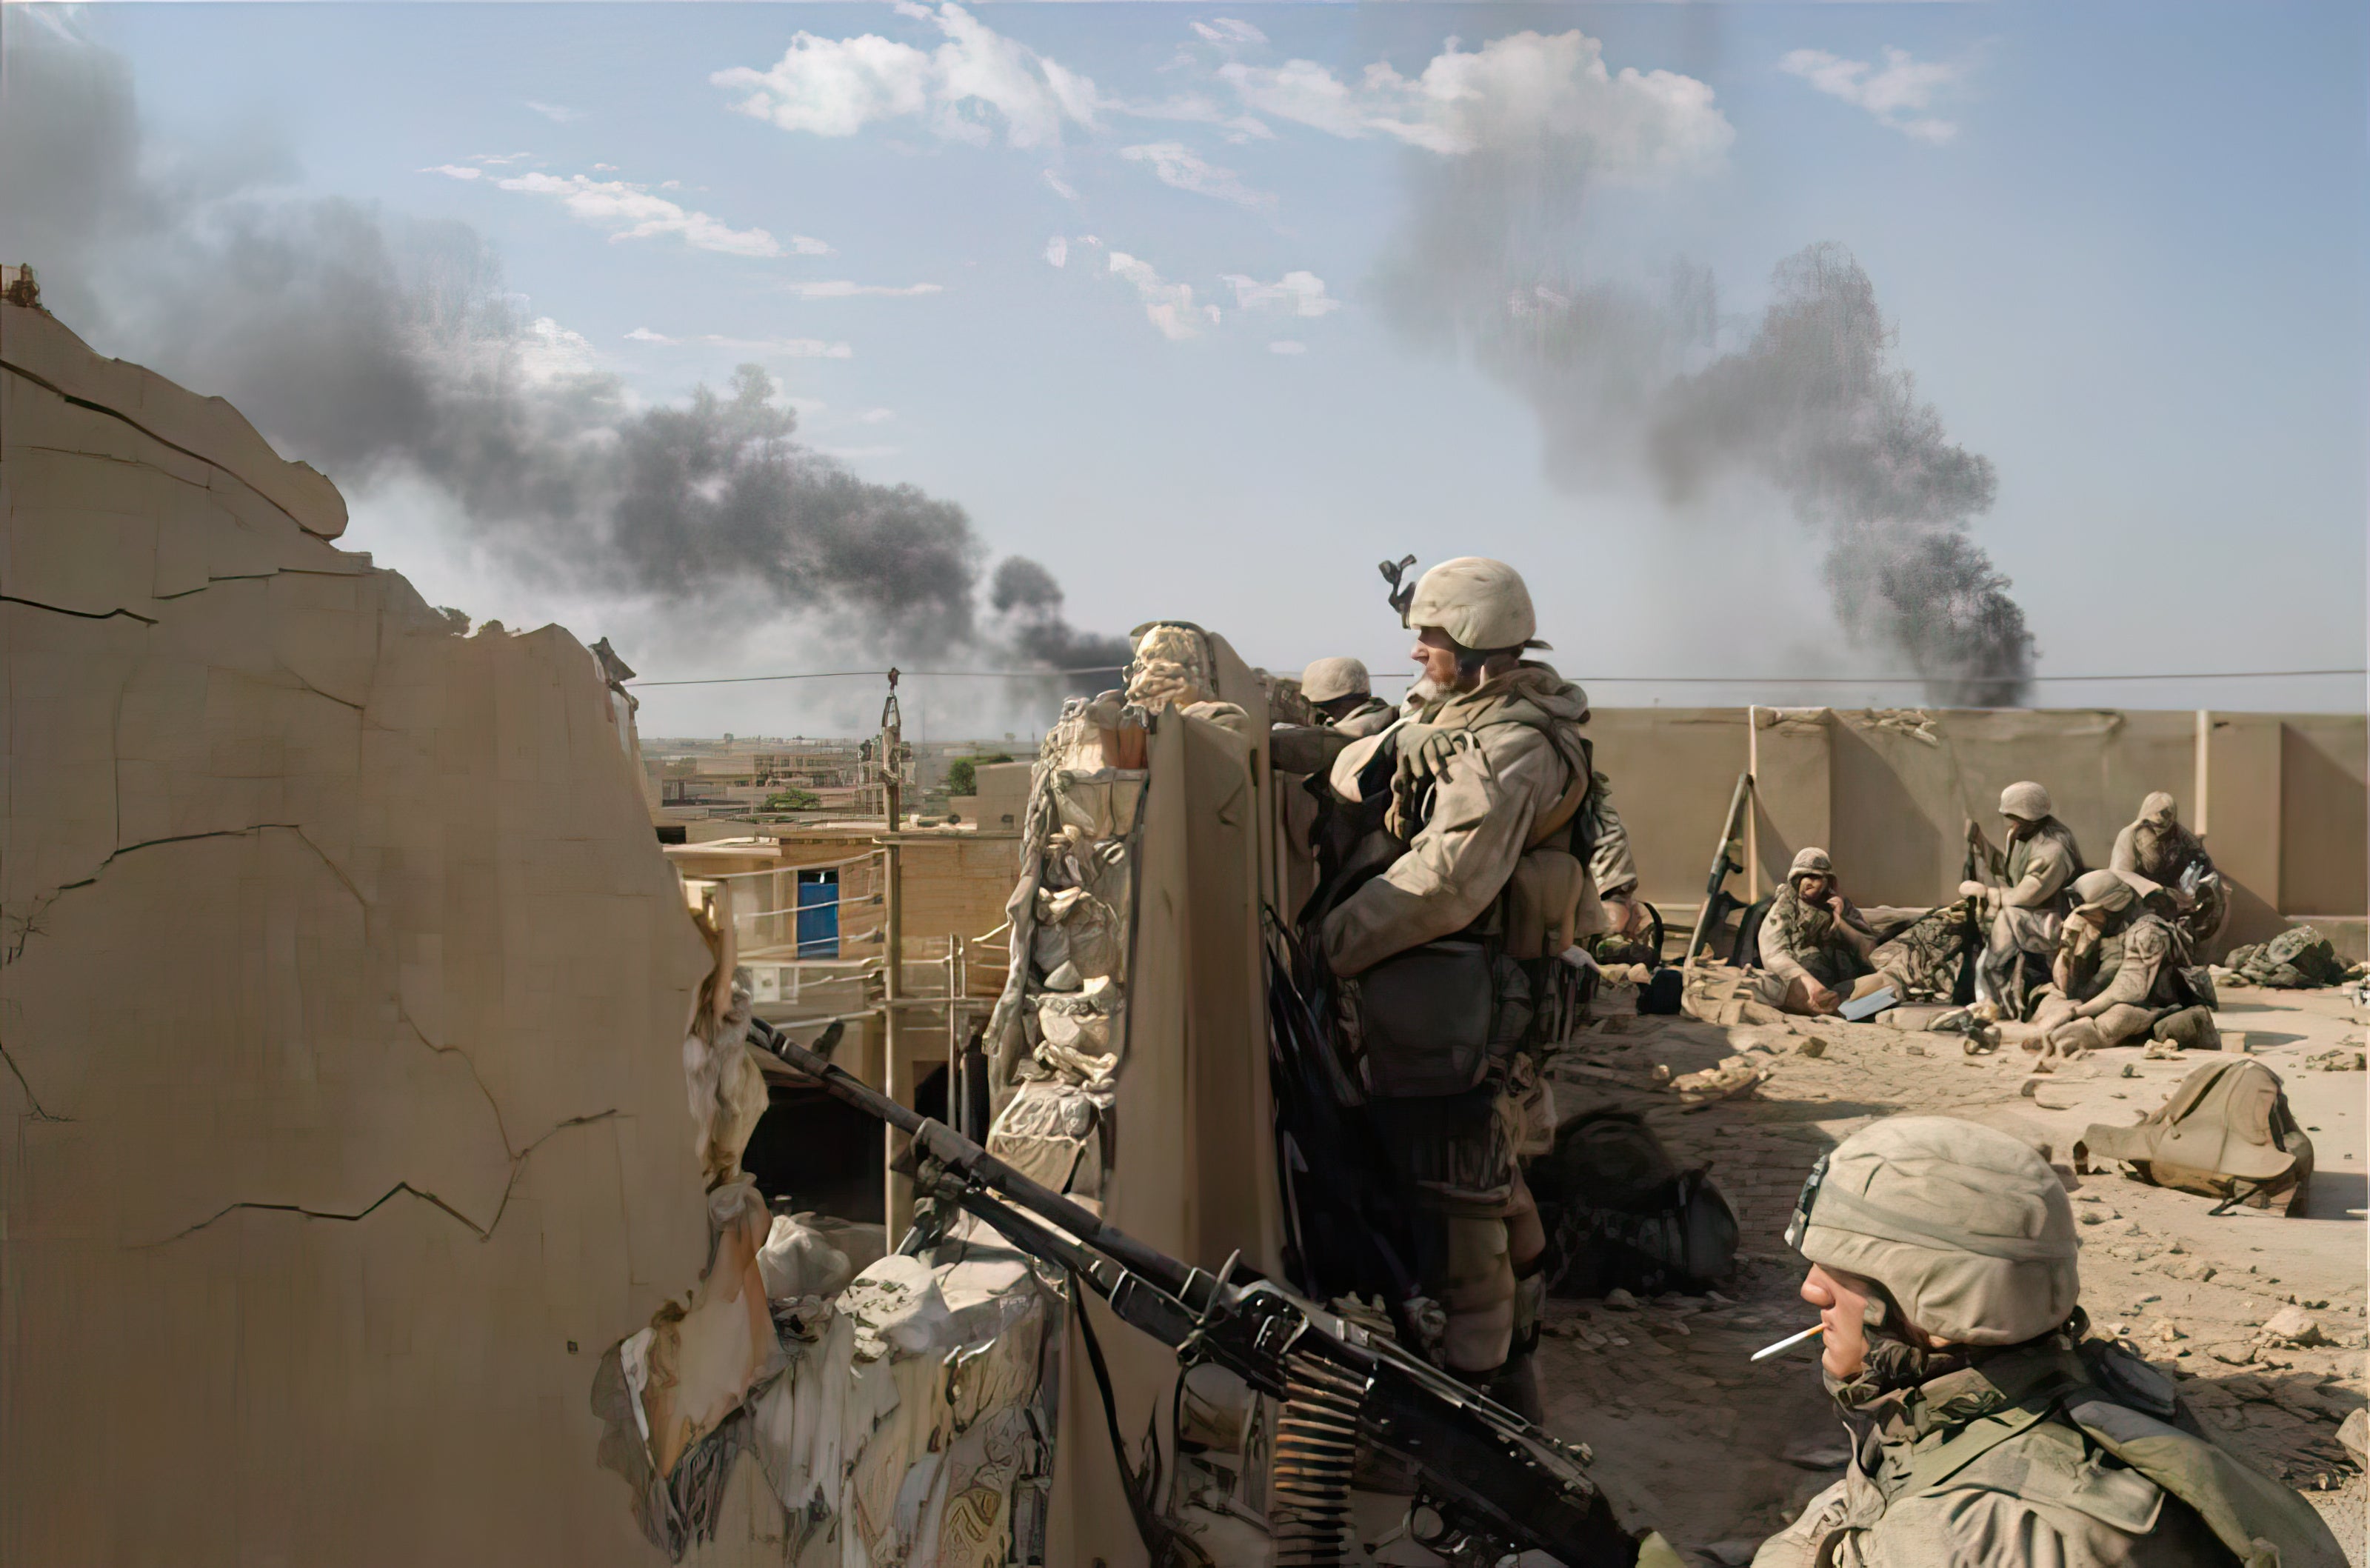 Battlefield Fallujah: Credits - Image from the battle